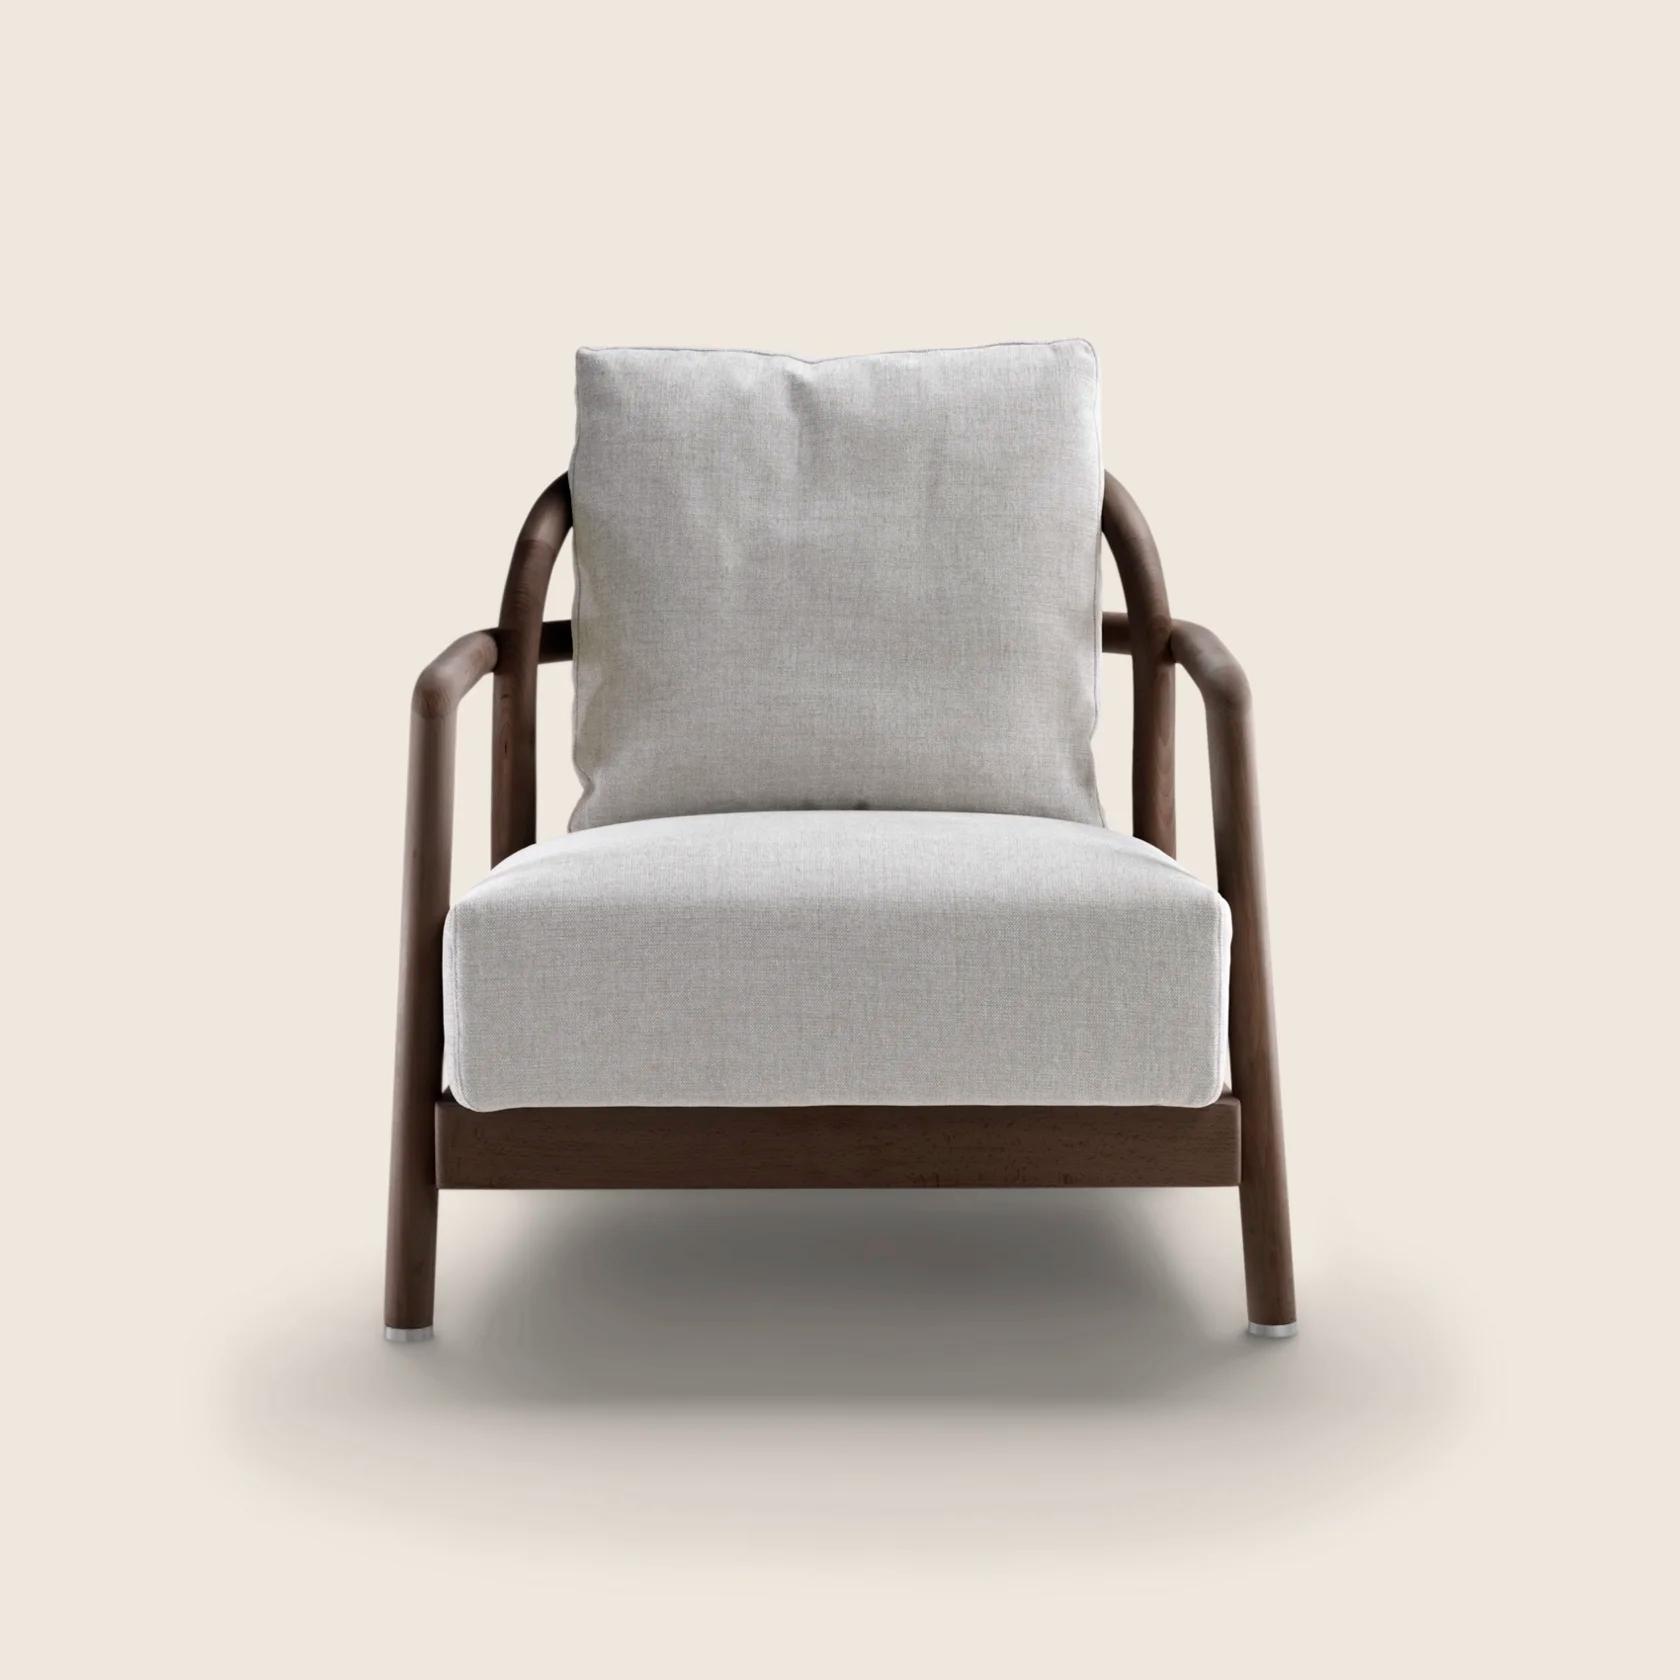 025121_ALISON_ARMCHAIR_02.png